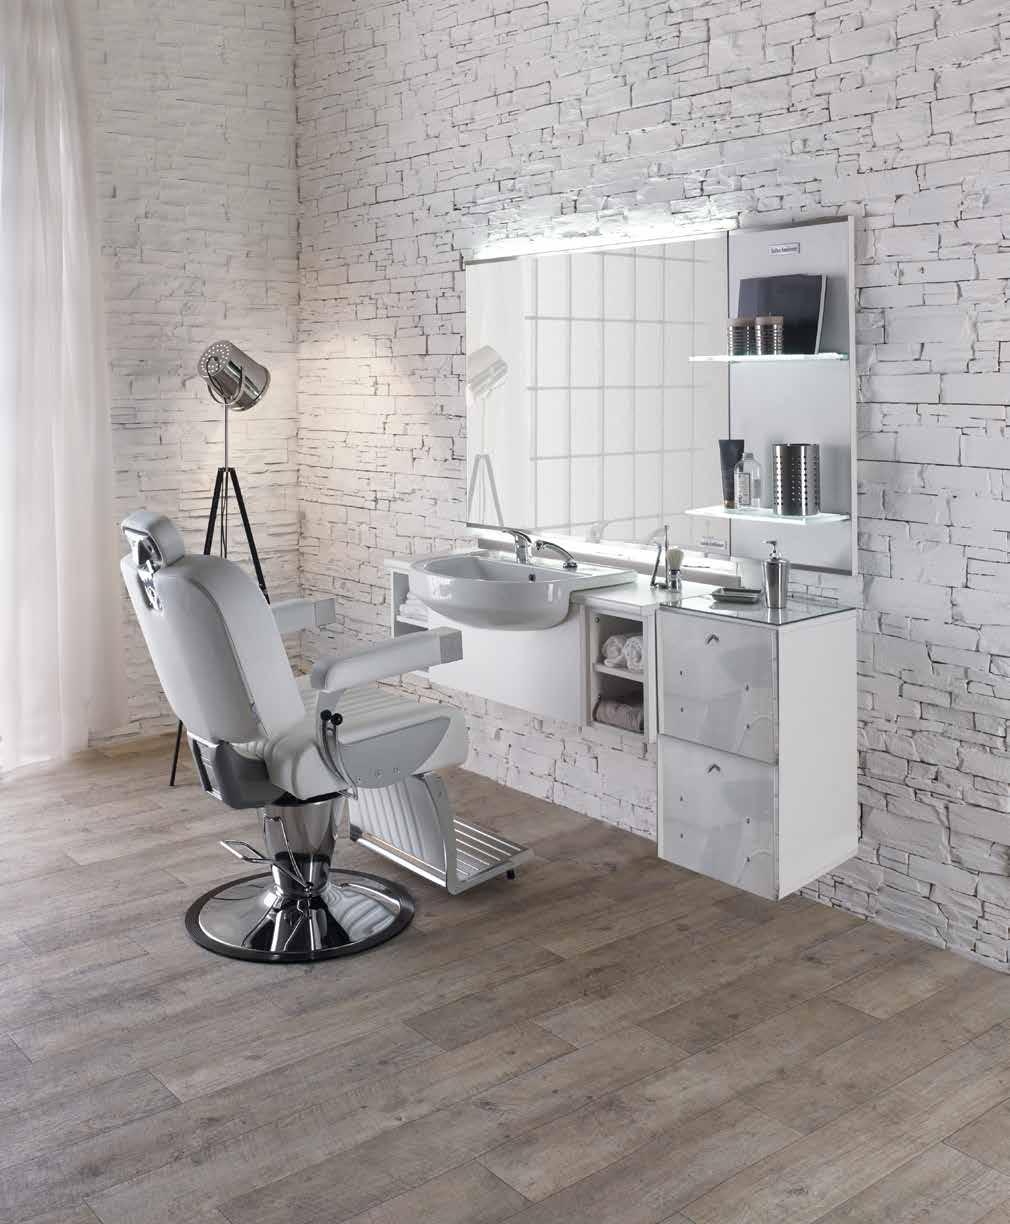 barber area To celebrate the success of 2014 s best-selling barber chair, the name of the Philippe chair will now be the Exécutif.